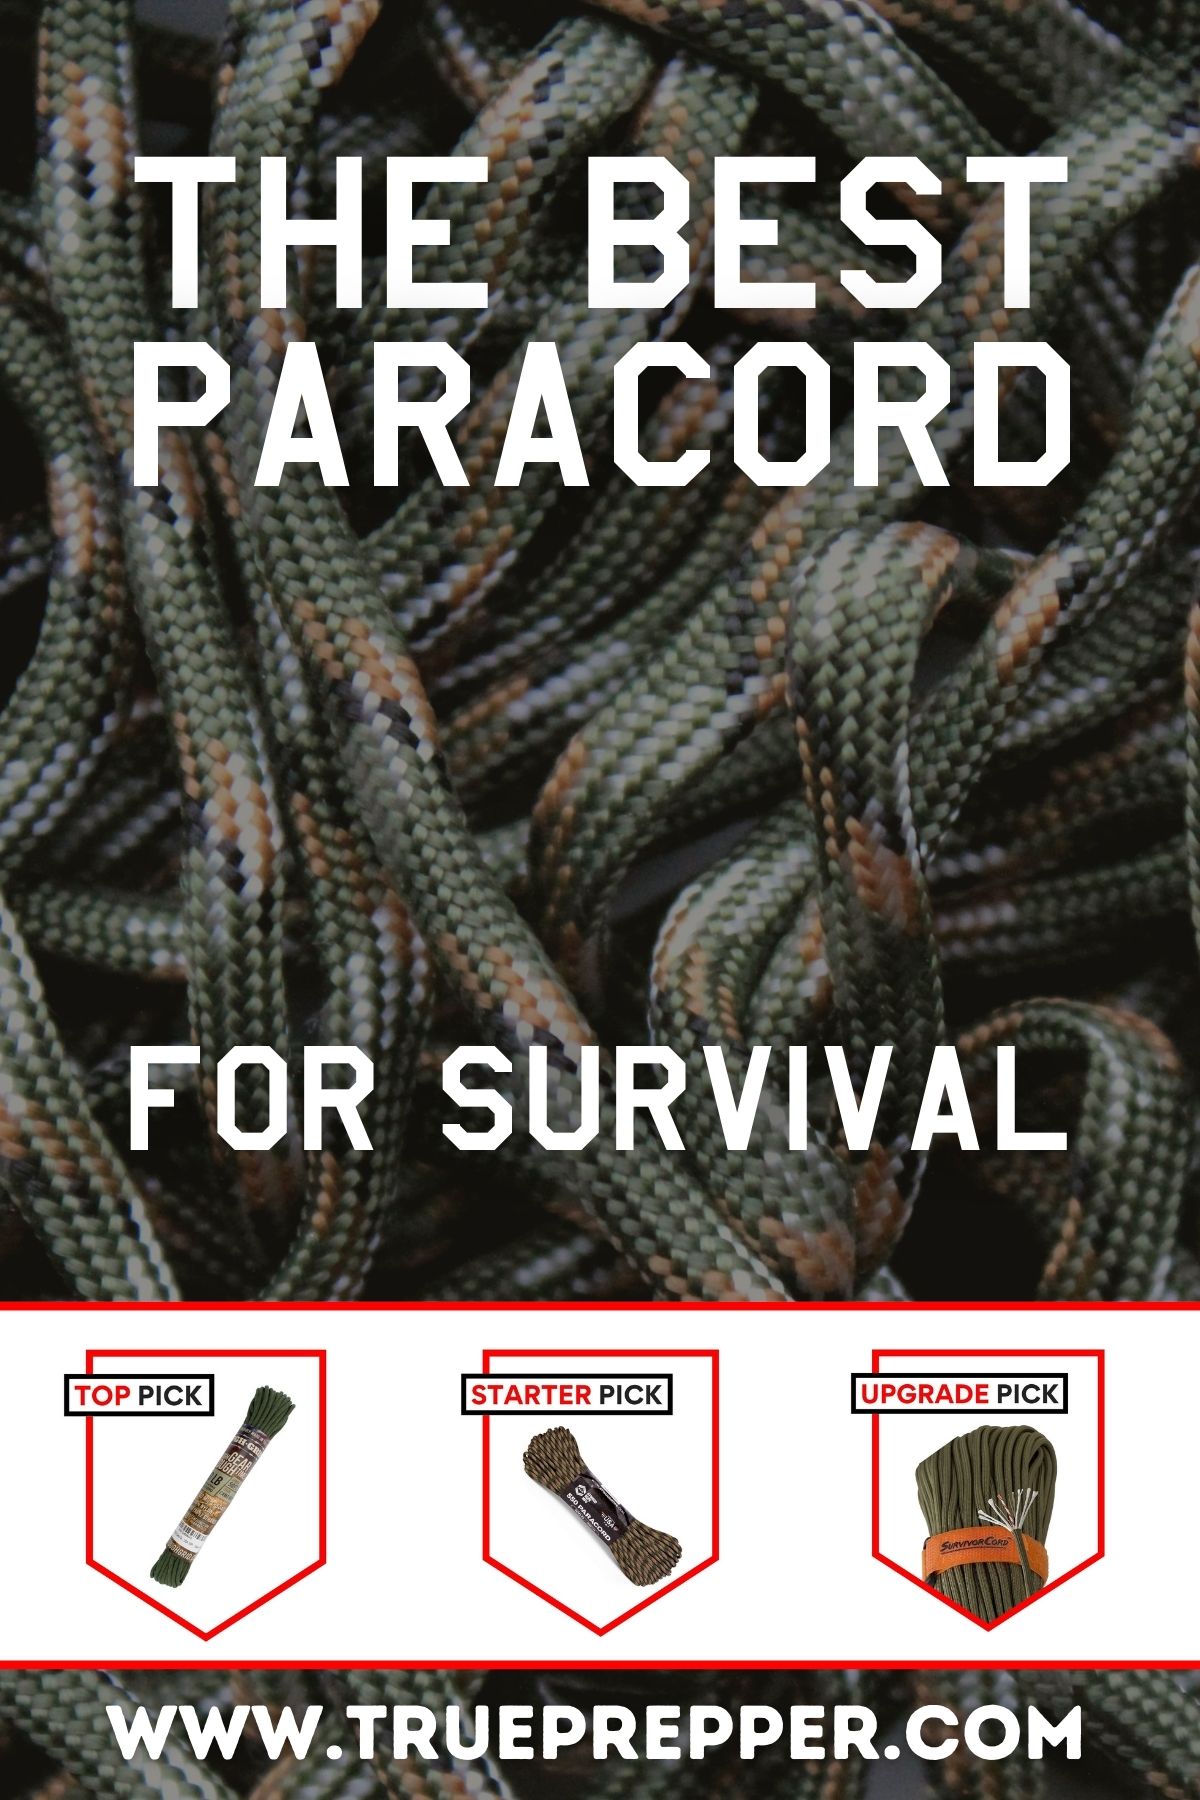 The Best Paracord for Survival